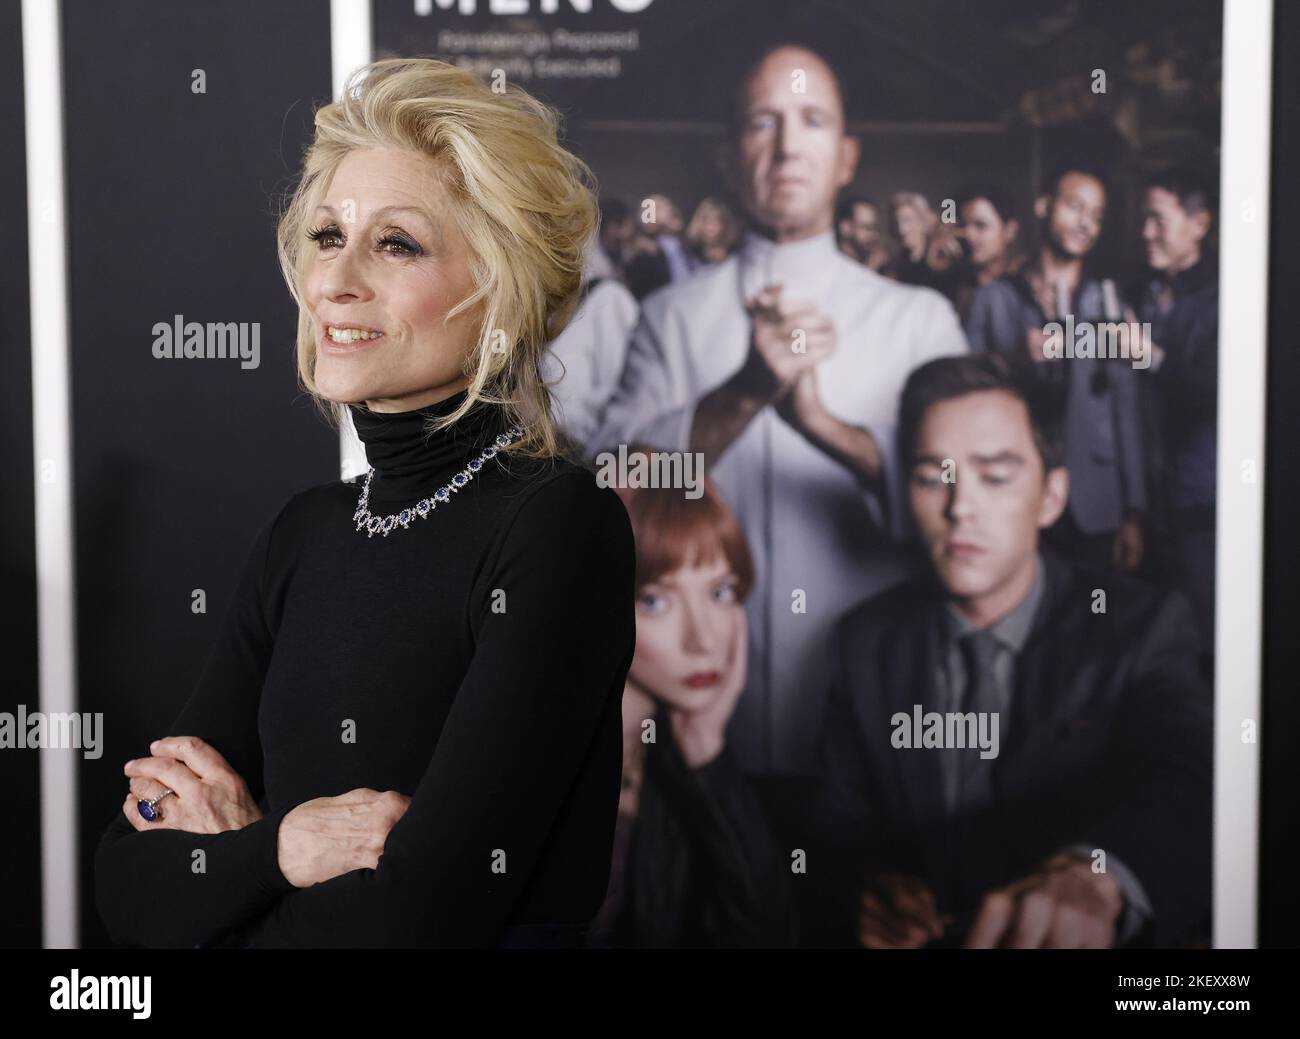 https://c8.alamy.com/comp/2KEXX8W/new-york-united-states-14th-nov-2022-judith-light-arrives-on-the-red-carpet-at-the-menu-new-york-premiere-at-amc-lincoln-square-theater-on-monday-november-14-2022-in-new-york-city-photo-by-john-angelilloupi-credit-upialamy-live-news-2KEXX8W.jpg